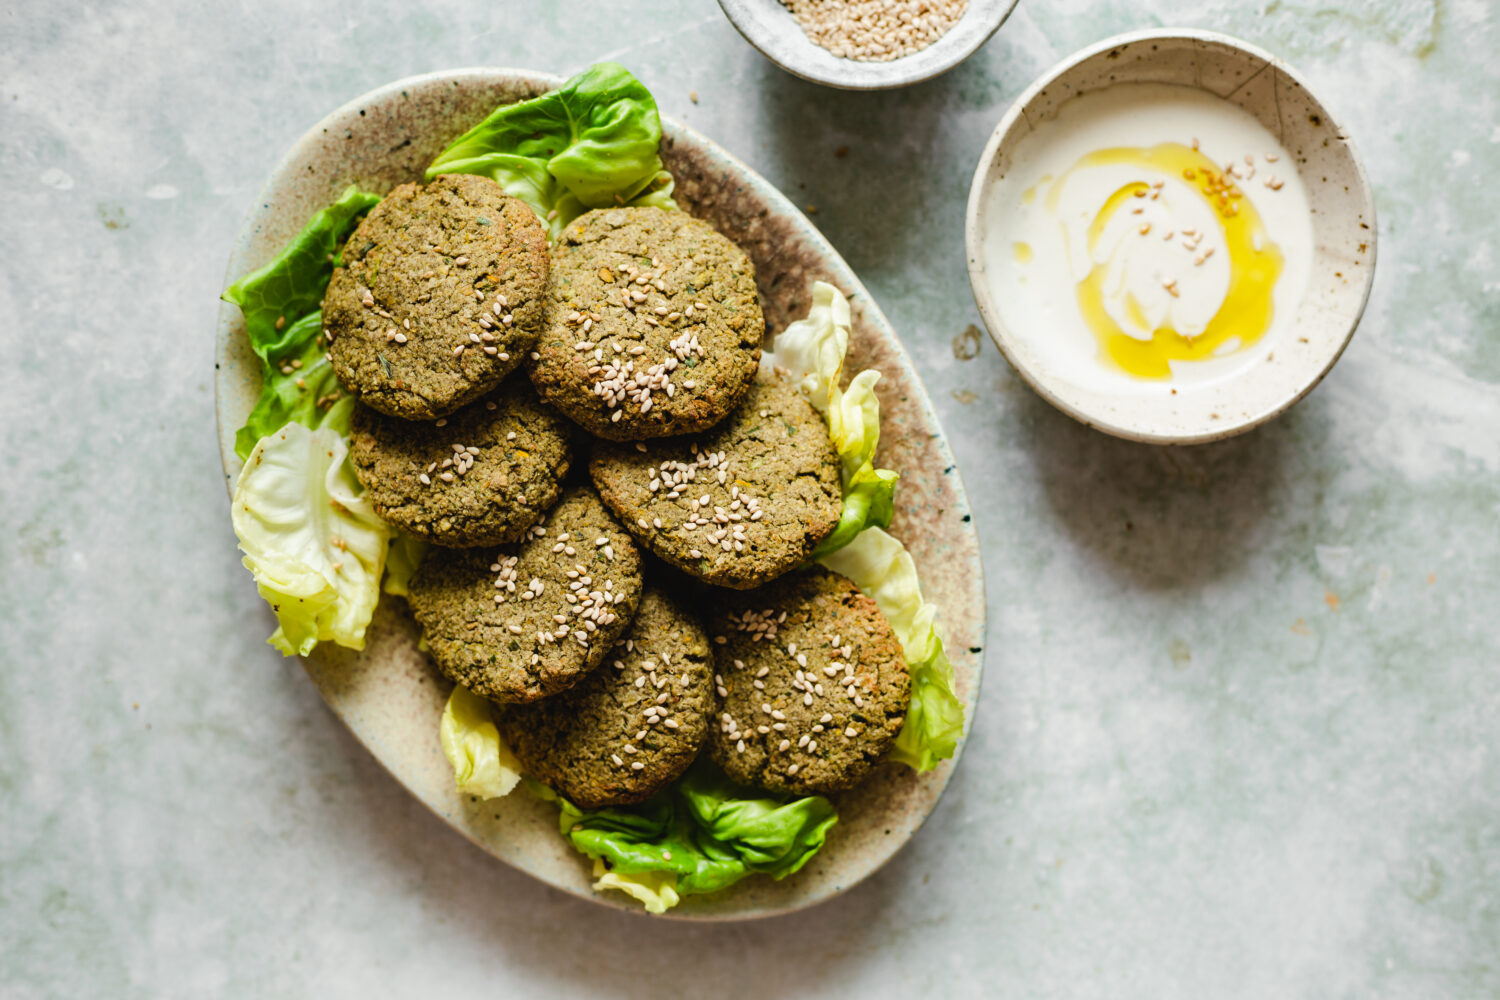 Baked falafel recipe with hemp seed protein powder